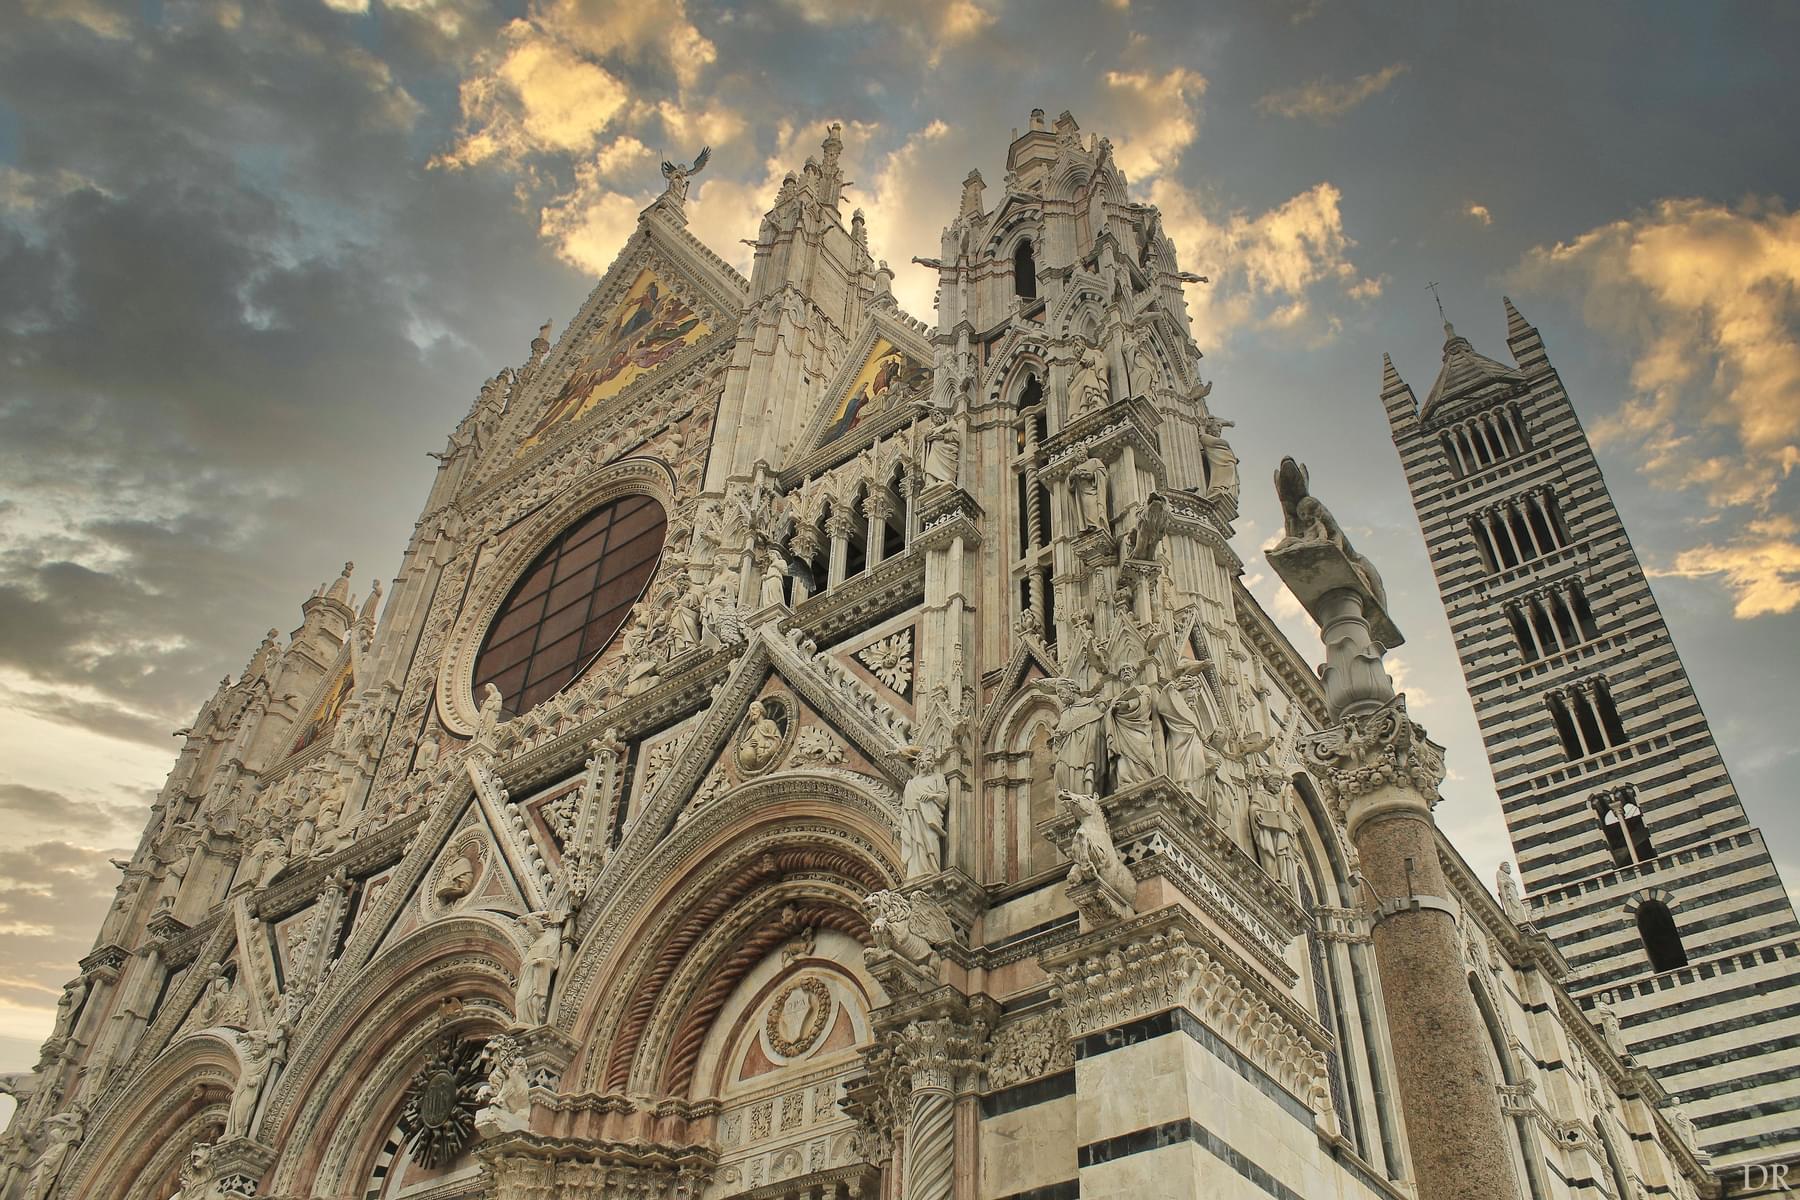 History of the Siena Cathedral